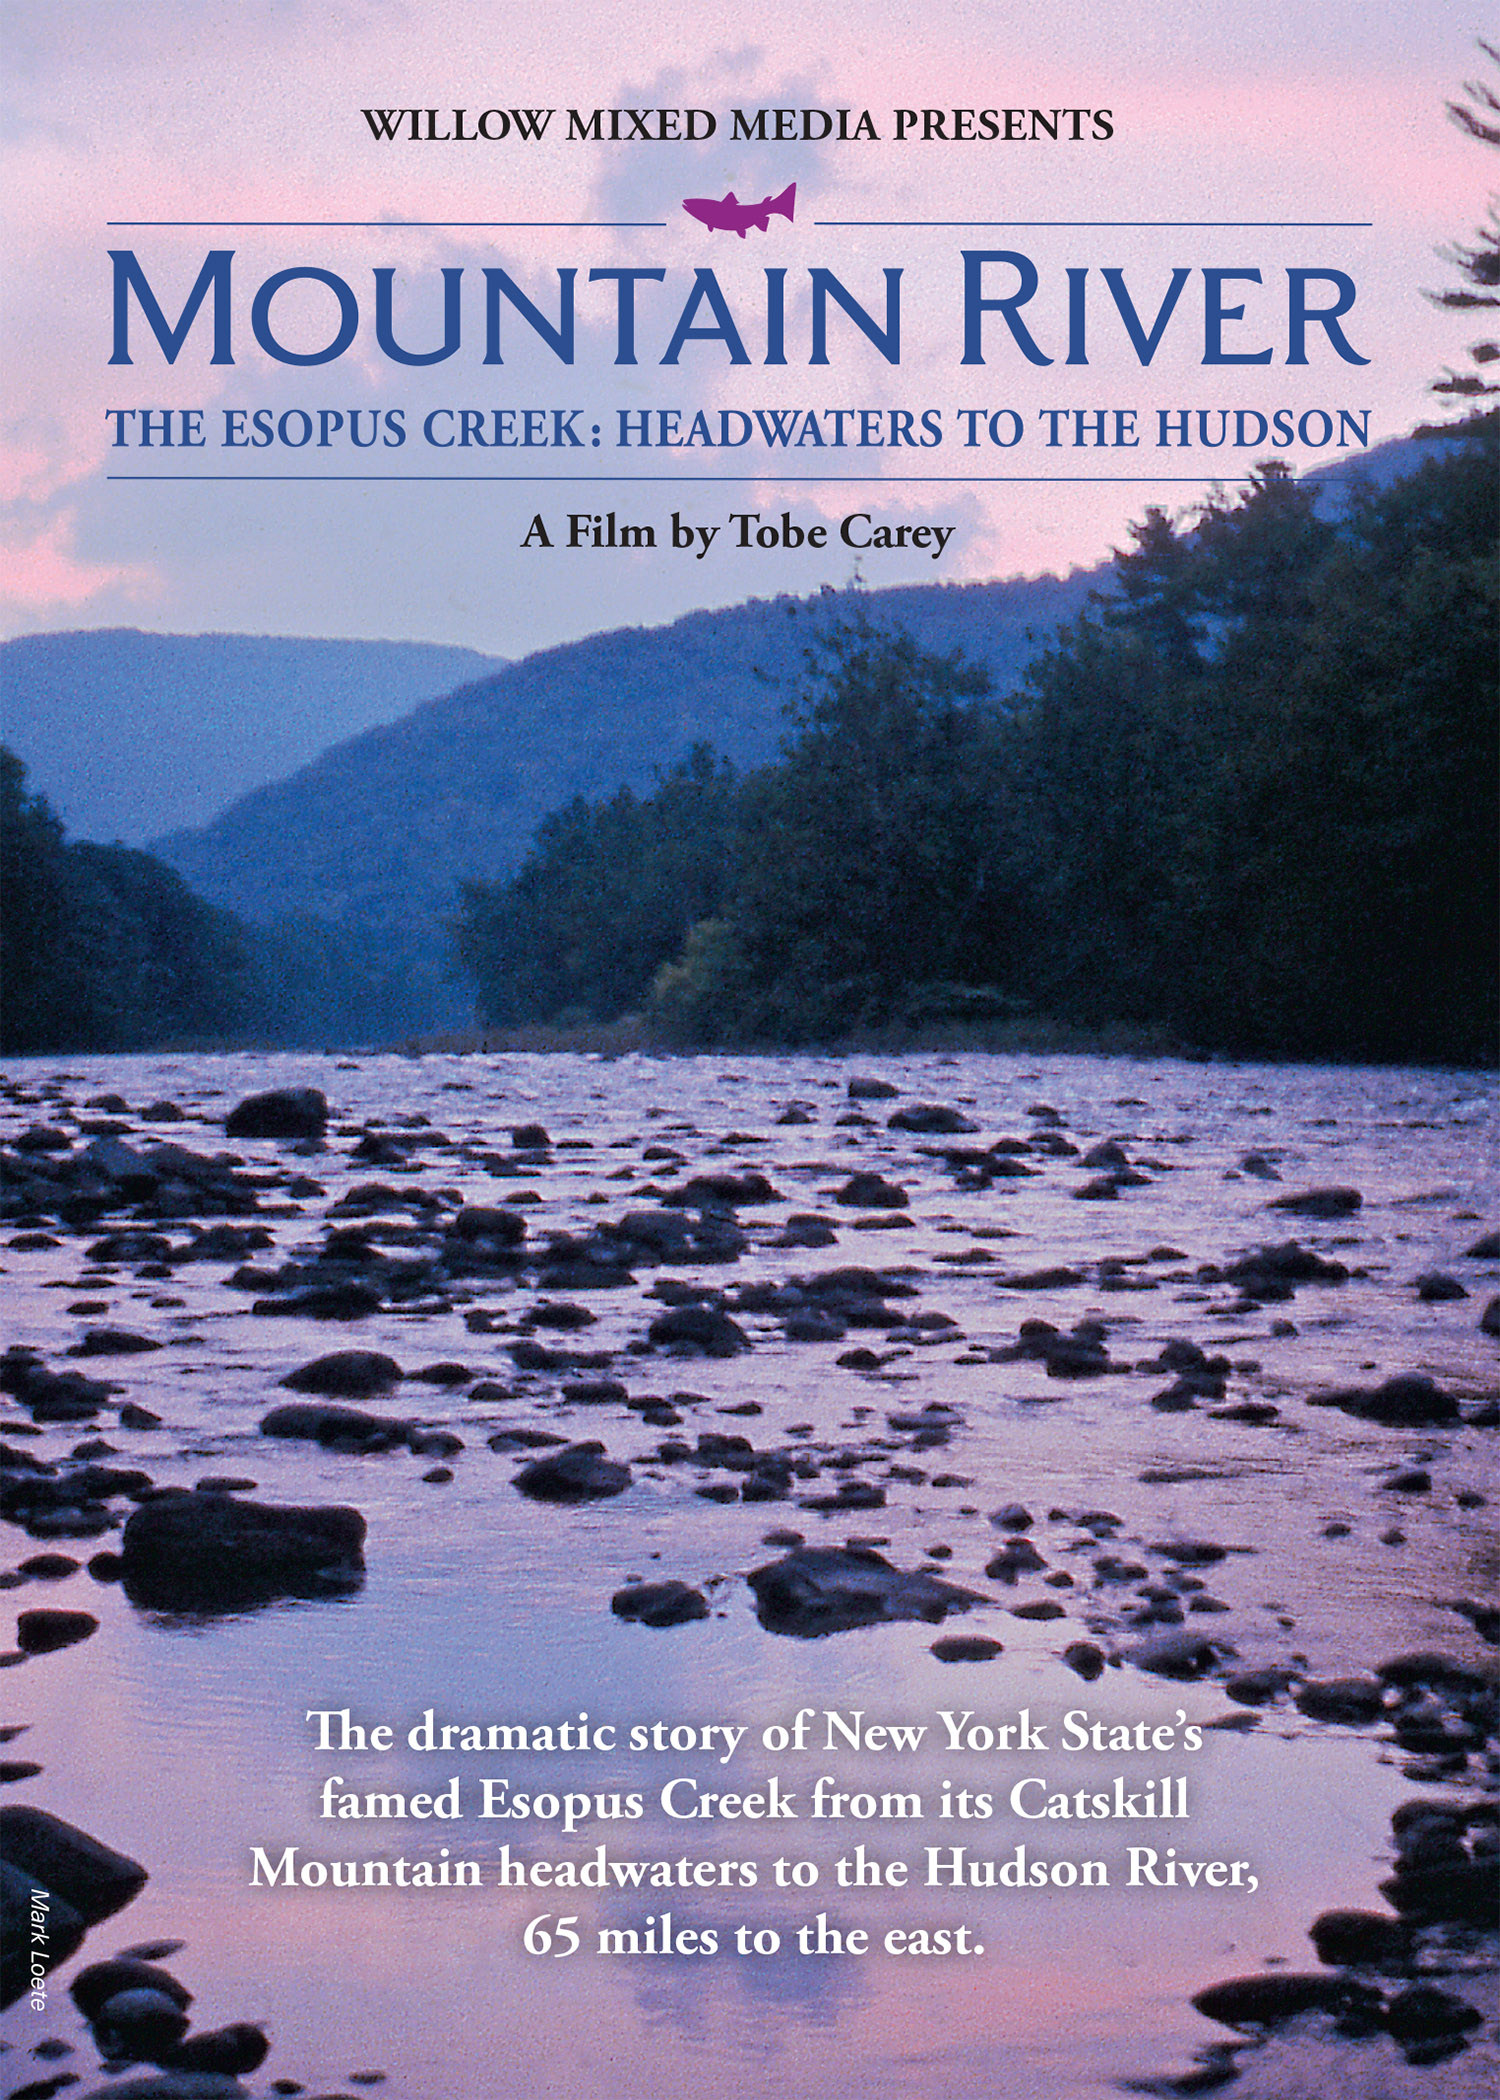 MOUNTAIN RIVER--The Esopus Creek: Headwaters to the Hudson